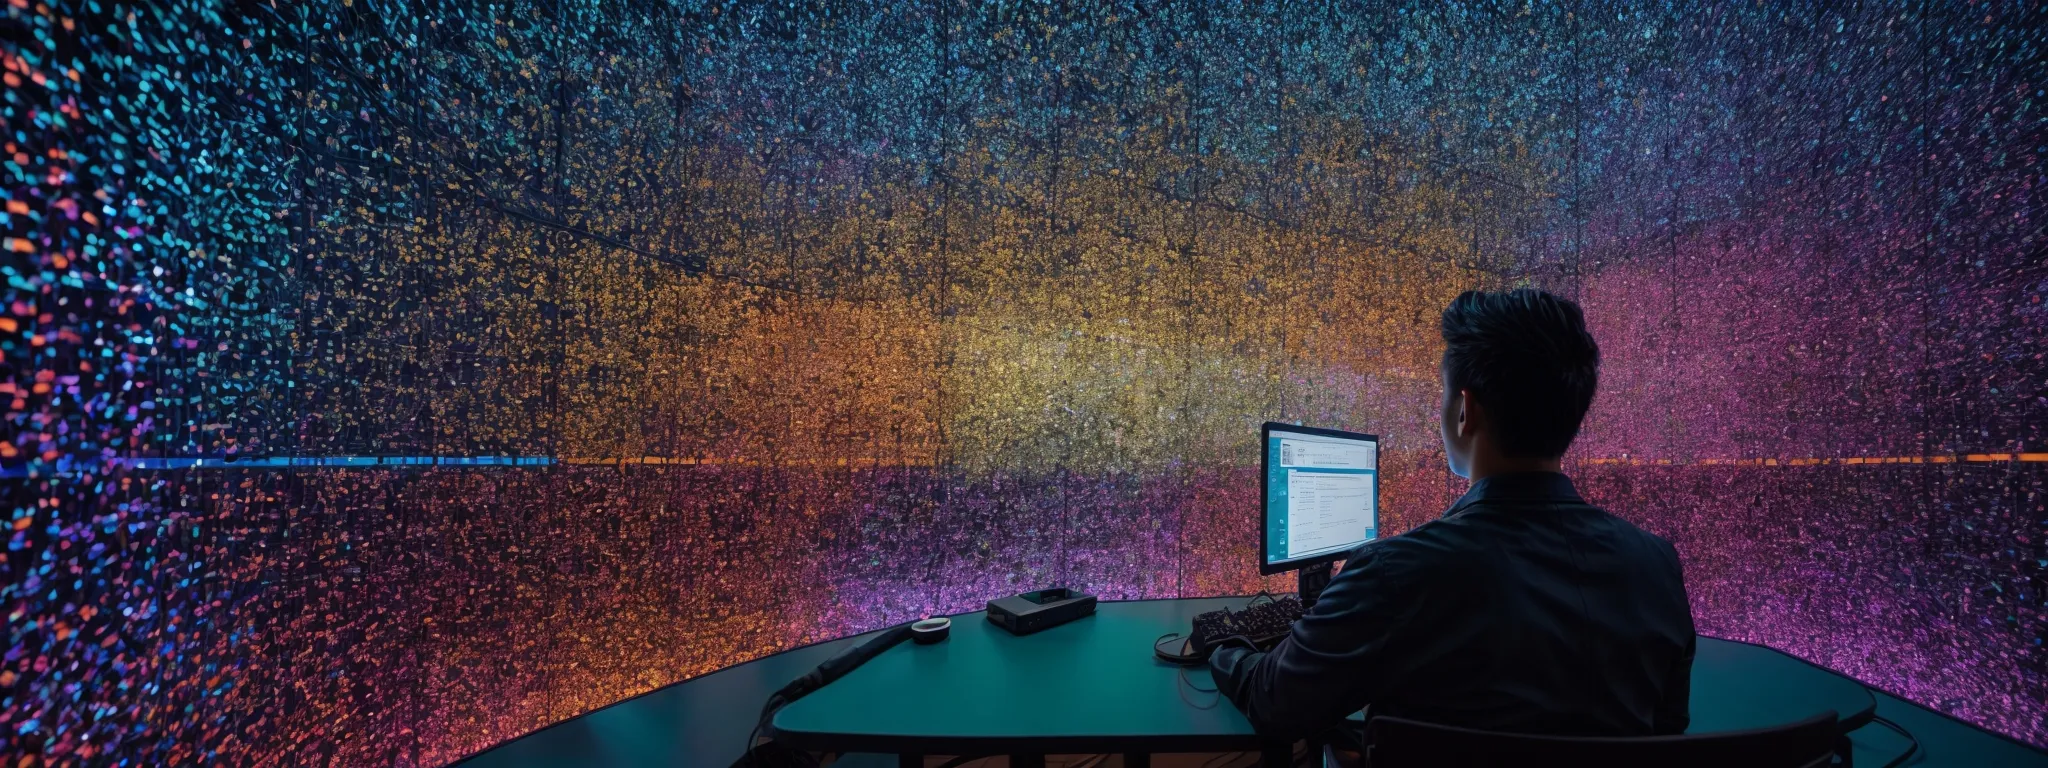 a focused individual intently studies a colorful array of interconnected nodes representing diverse keyword clusters on a vast digital screen.